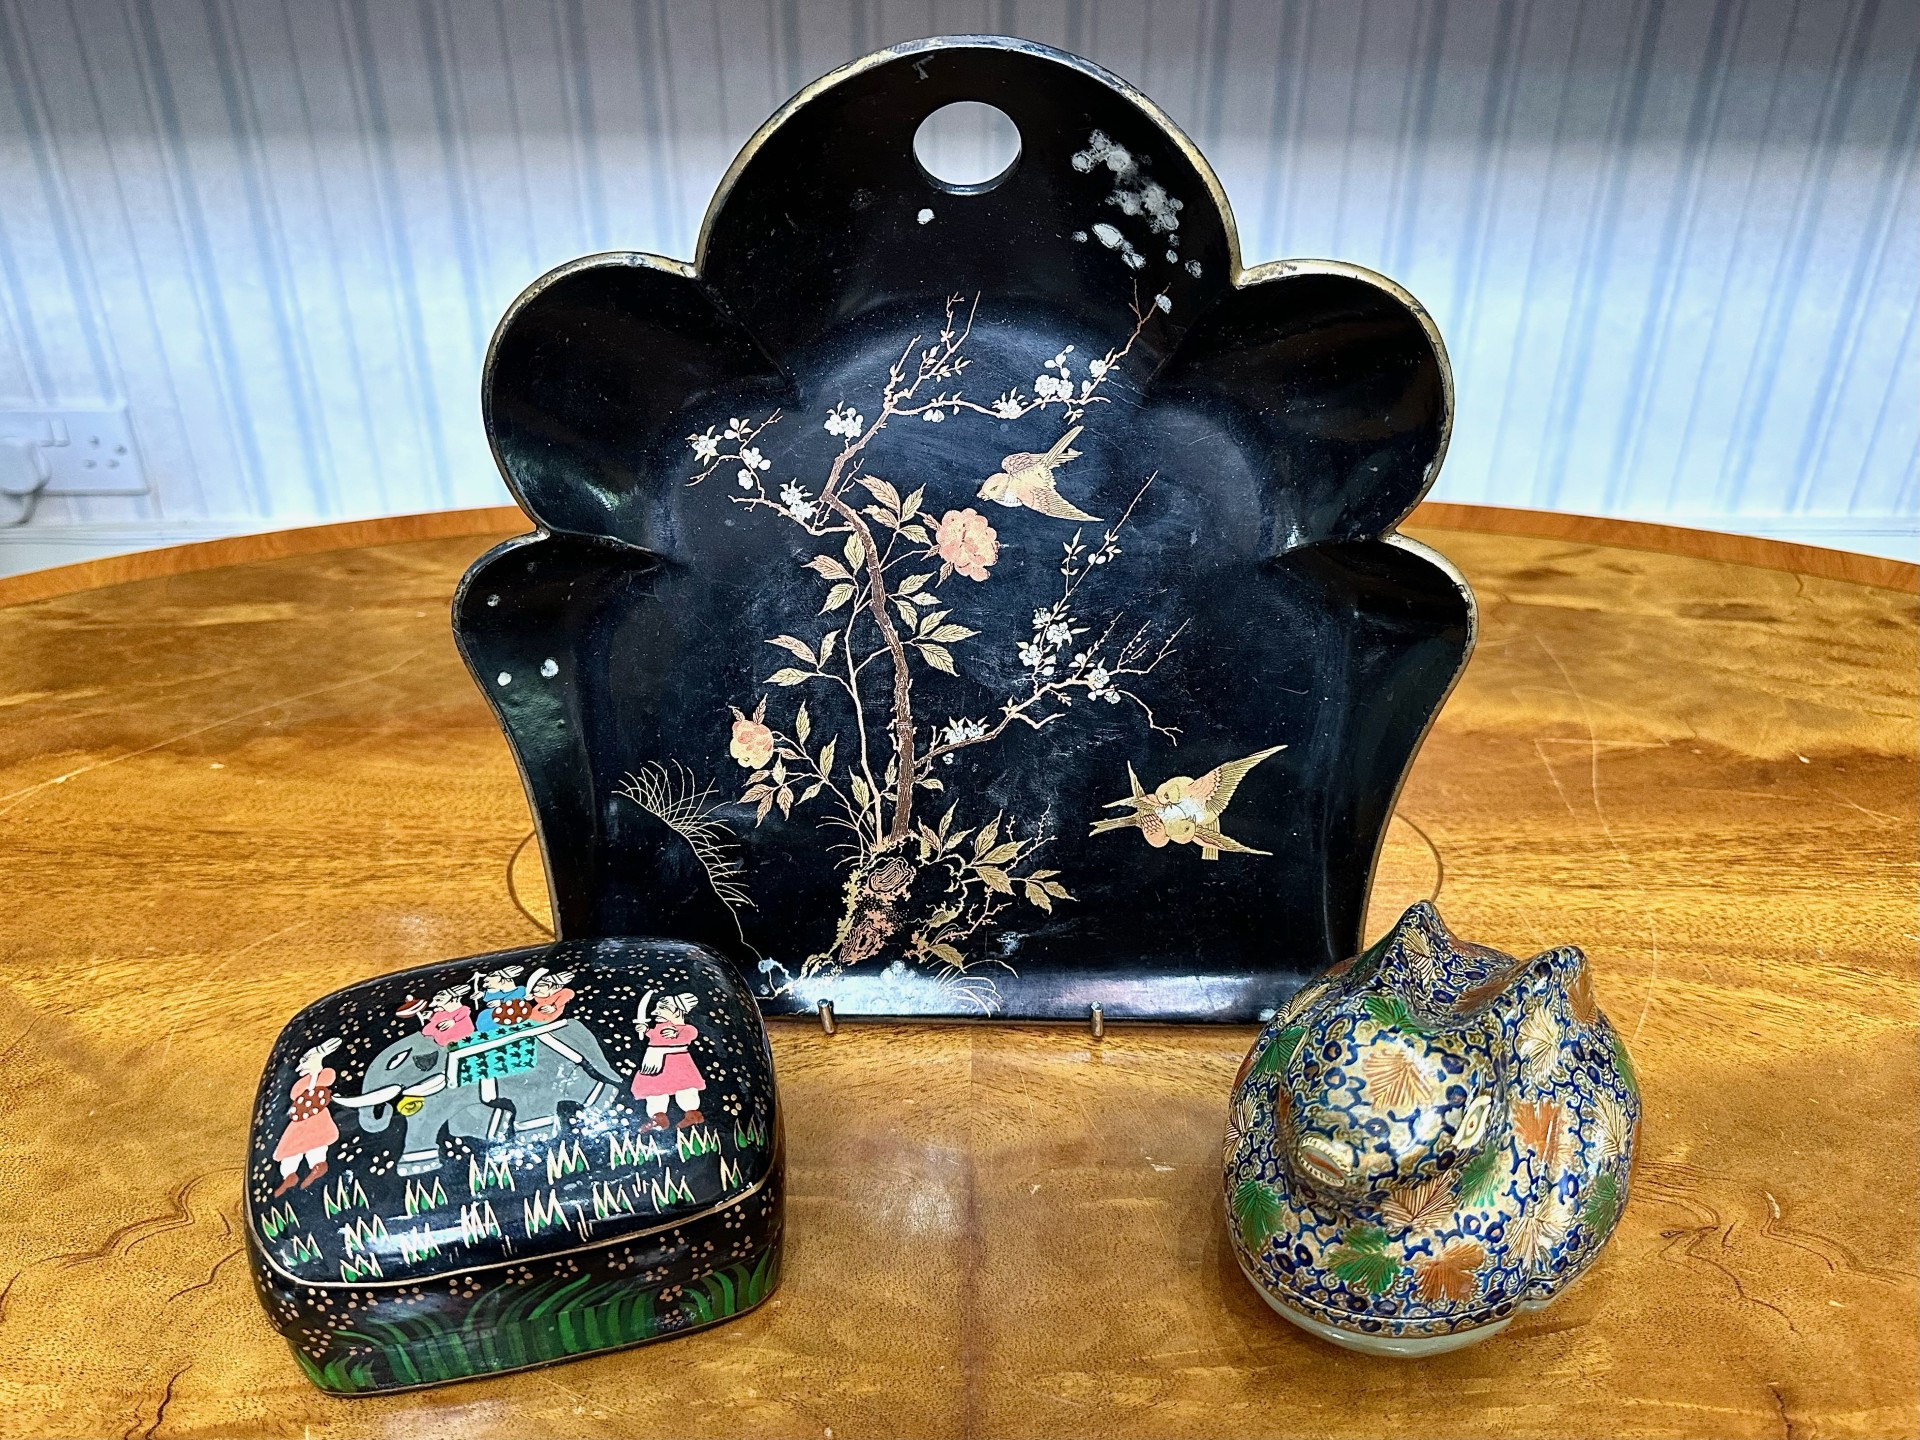 Three Victorian Papier Mache Items, including a lidded box, a box in the form of a duck, and a crumb